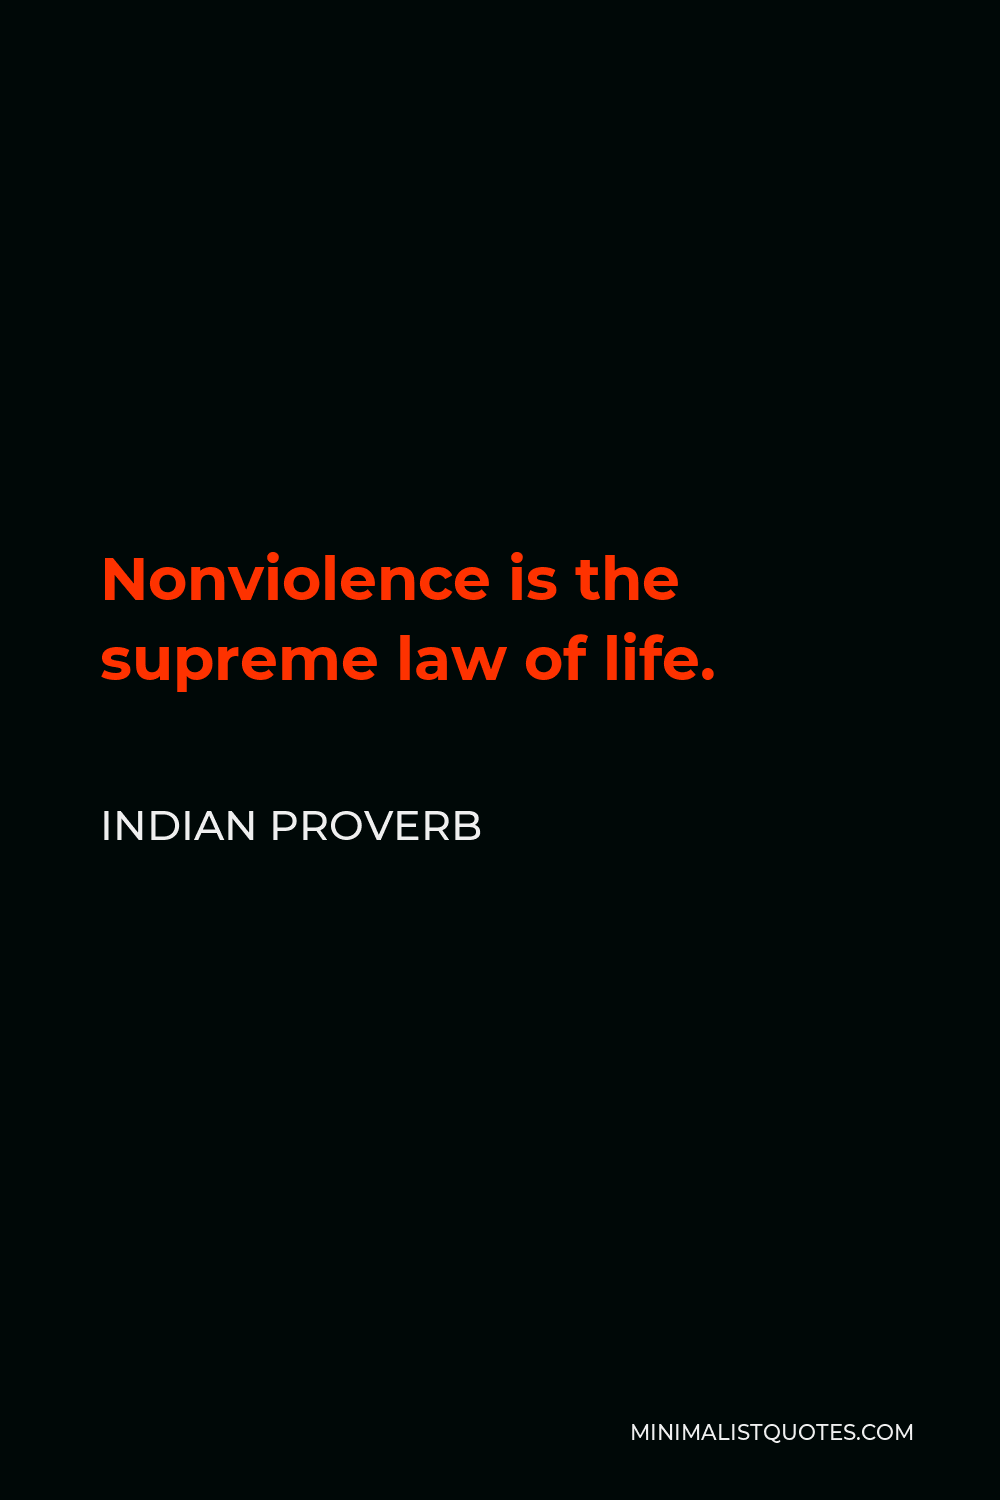 Indian Proverb Quote - Nonviolence is the supreme law of life.